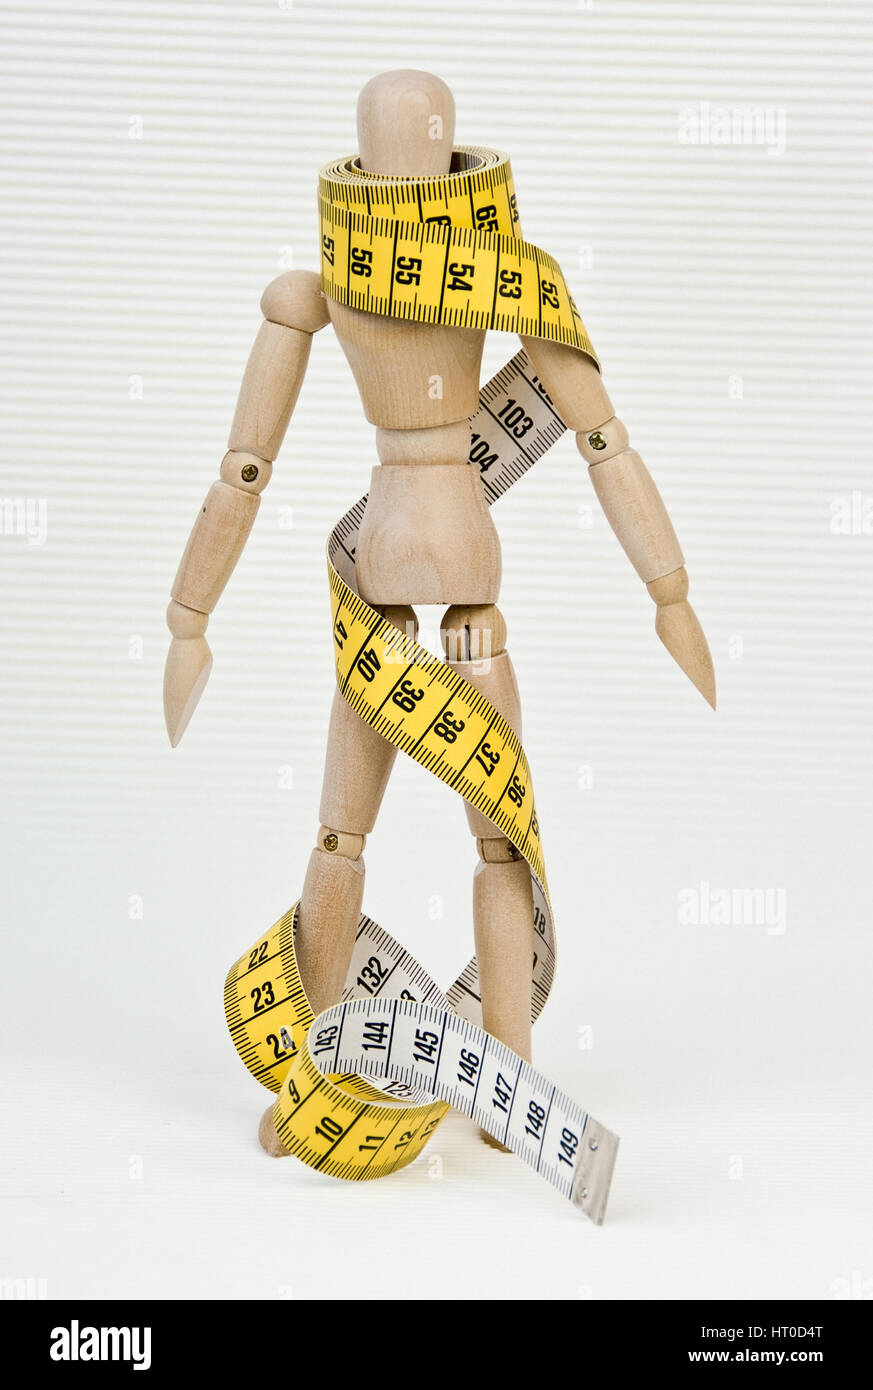 Gliederpuppe mit Ma?band umwickelt - jointed doll wound in a measuring tape Stock Photo